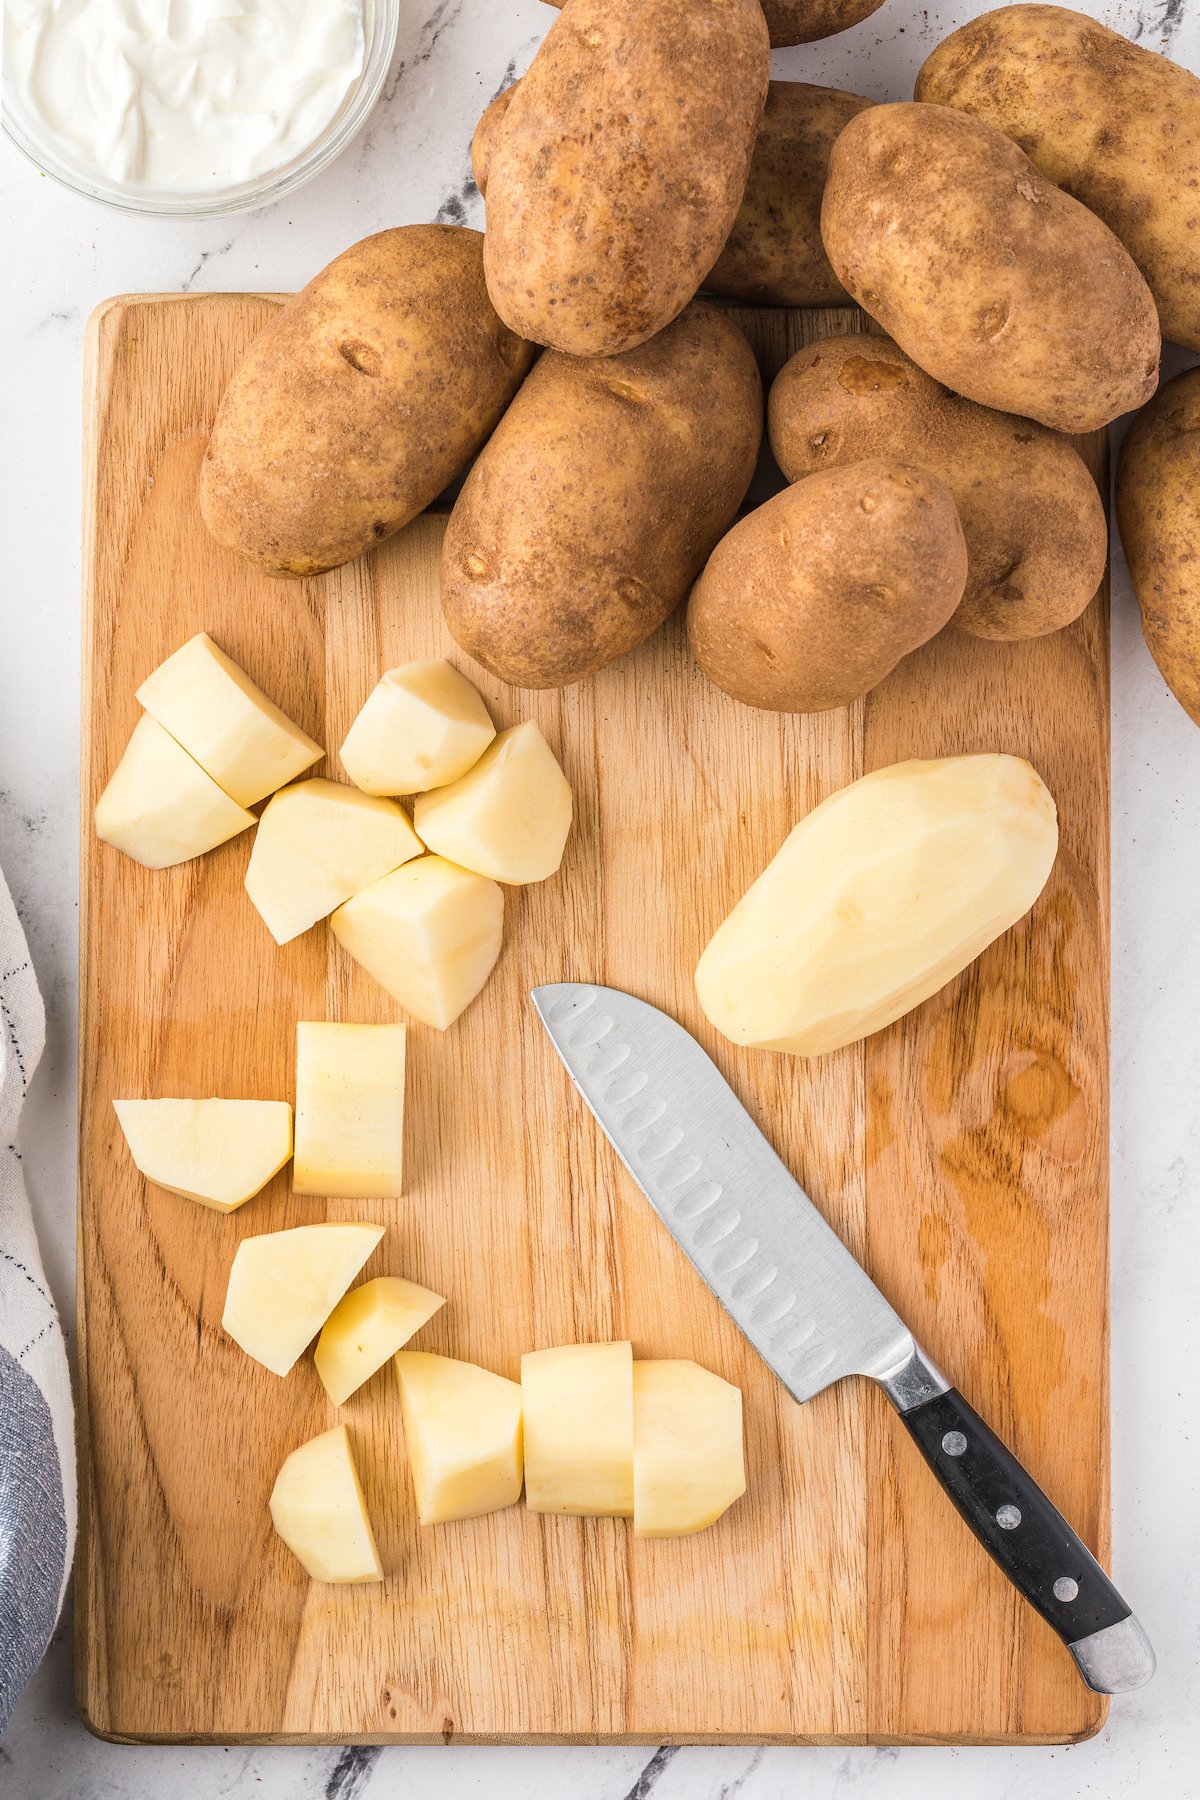 Overhead shot of a wooden cutting board. Two peeled potatoes are on the board with a knife. One has been cut into cubes. More potatoes are near the cutting board.